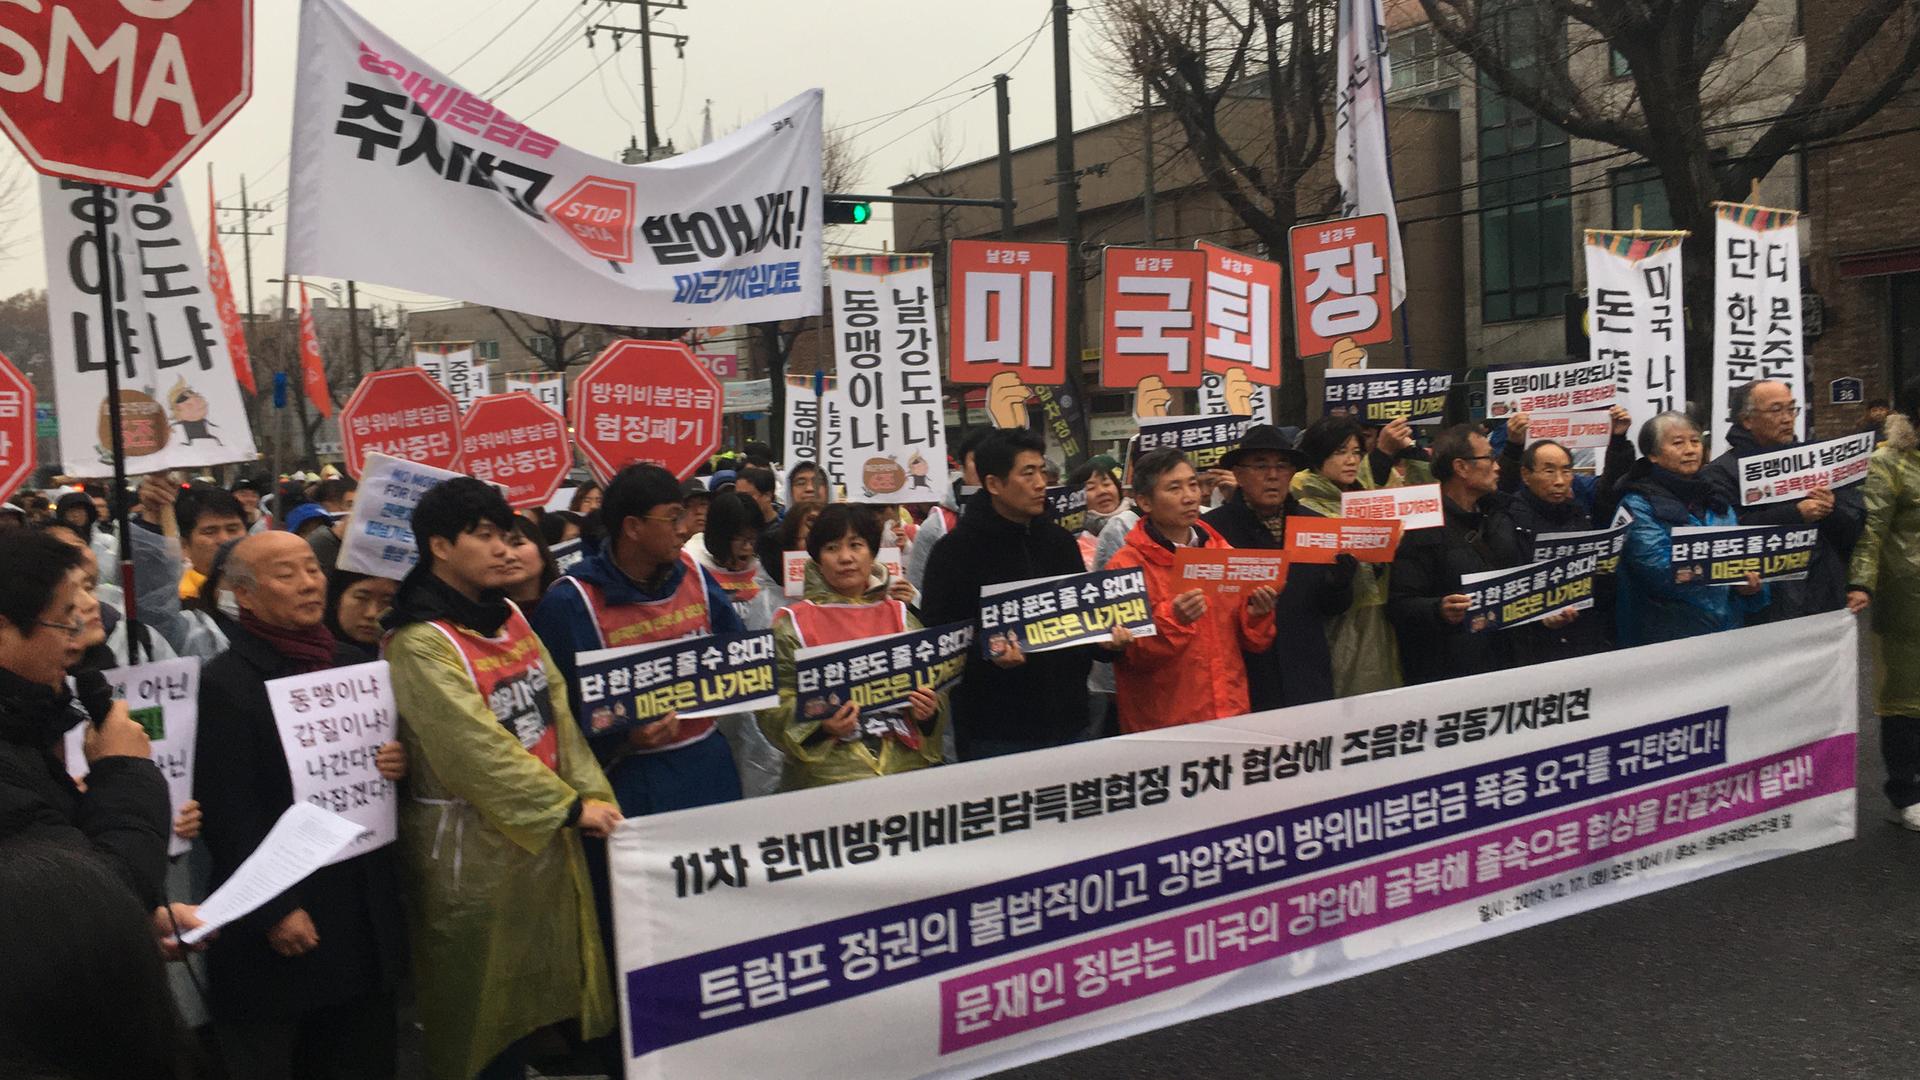 A group of protesters march with a large banner with large words in Korean language